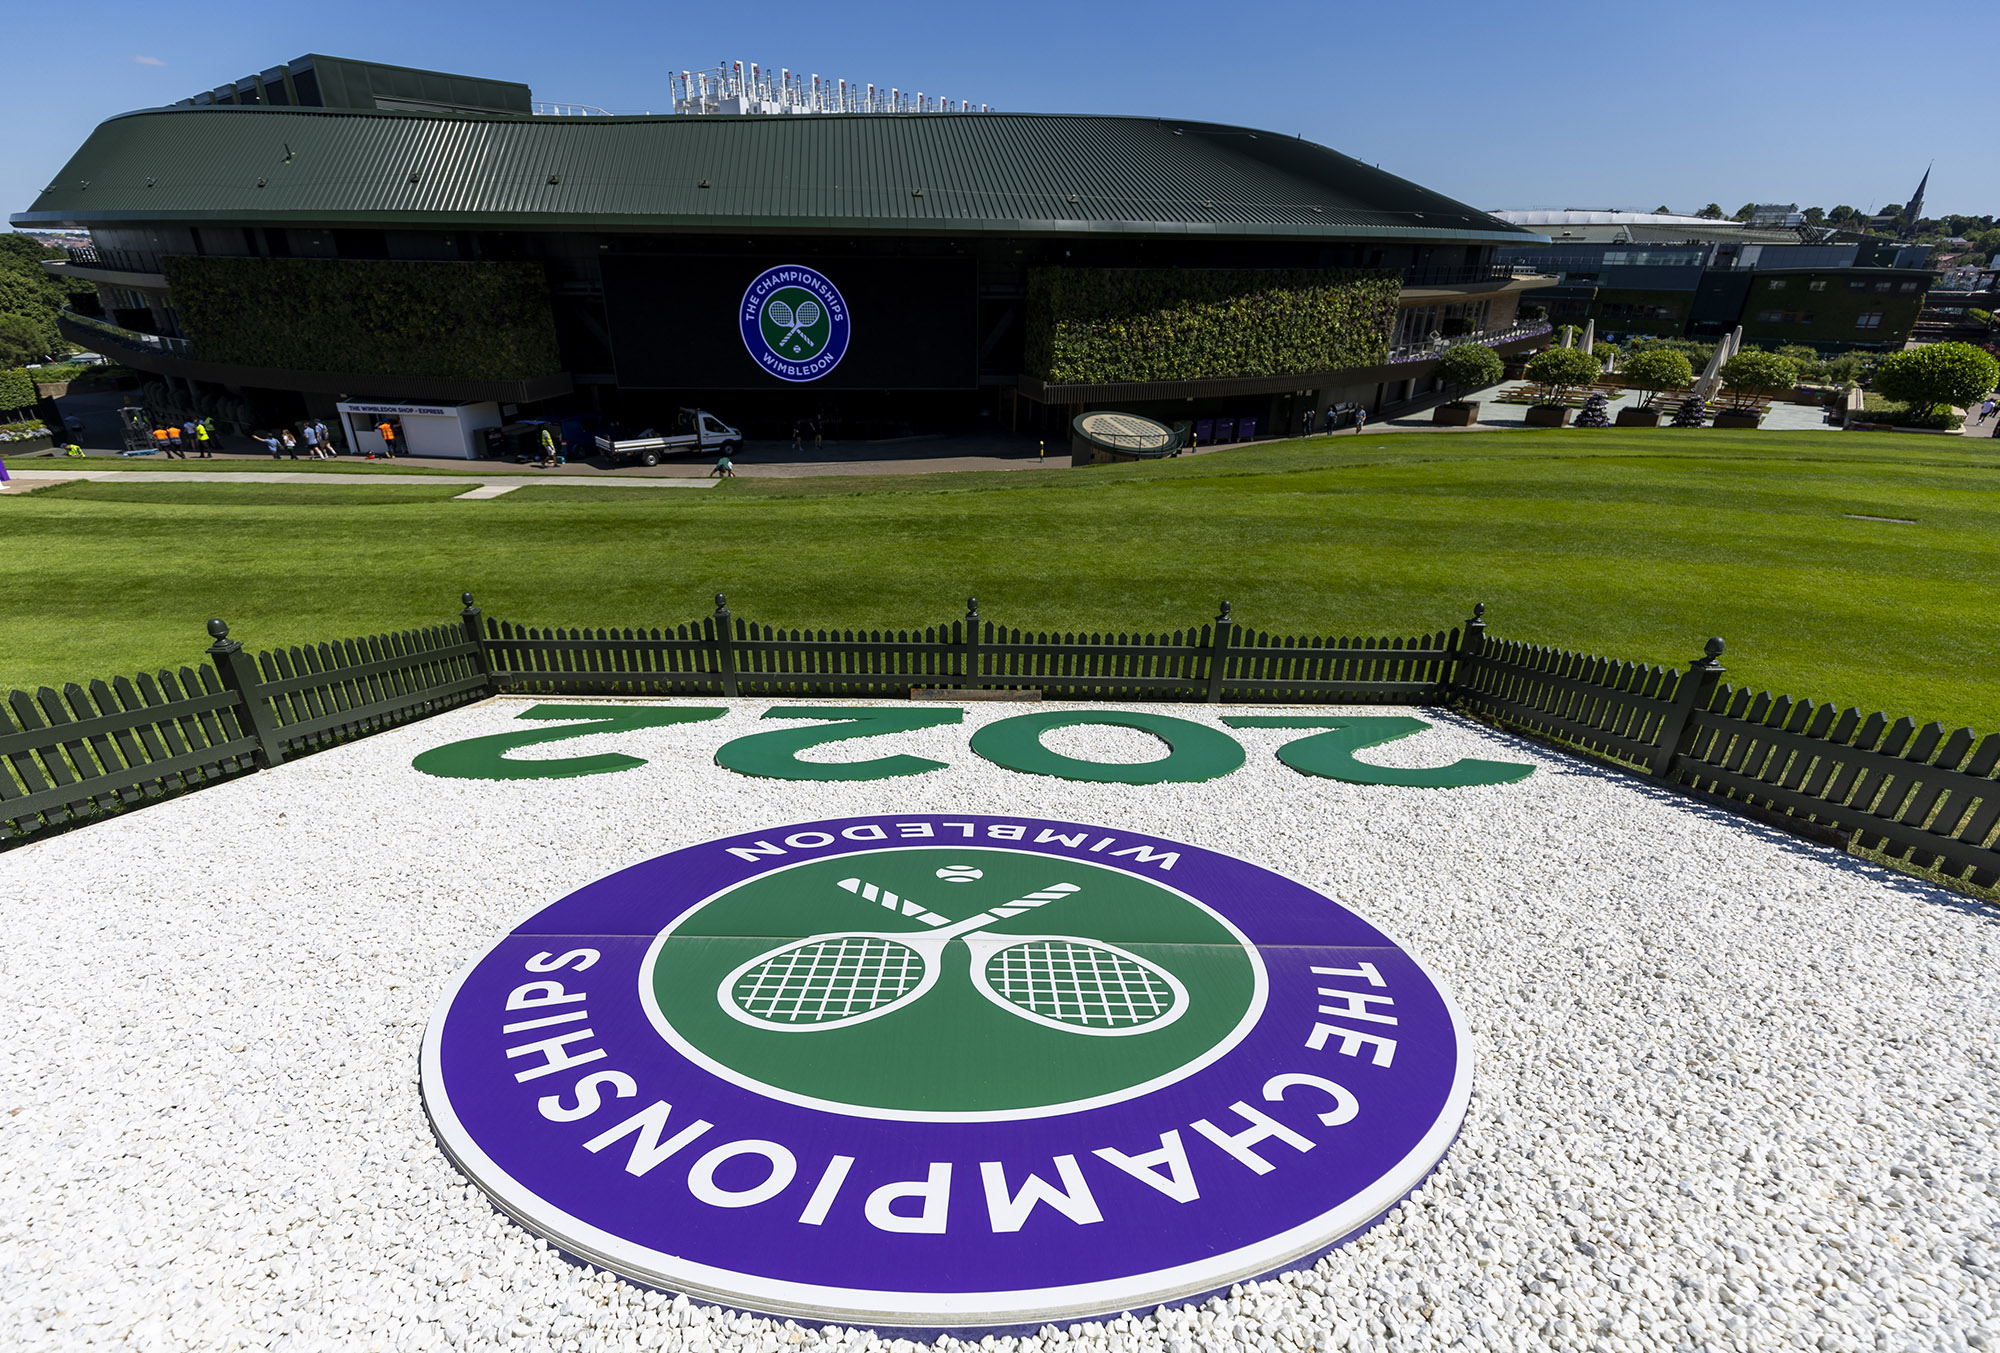 General view of the 2022 tournament logo ahead of the 2022 Wimbledon Championship at the All England Lawn Tennis and Croquet Club, Wimbledon. Picture date: Wednesday June 22, 2022.